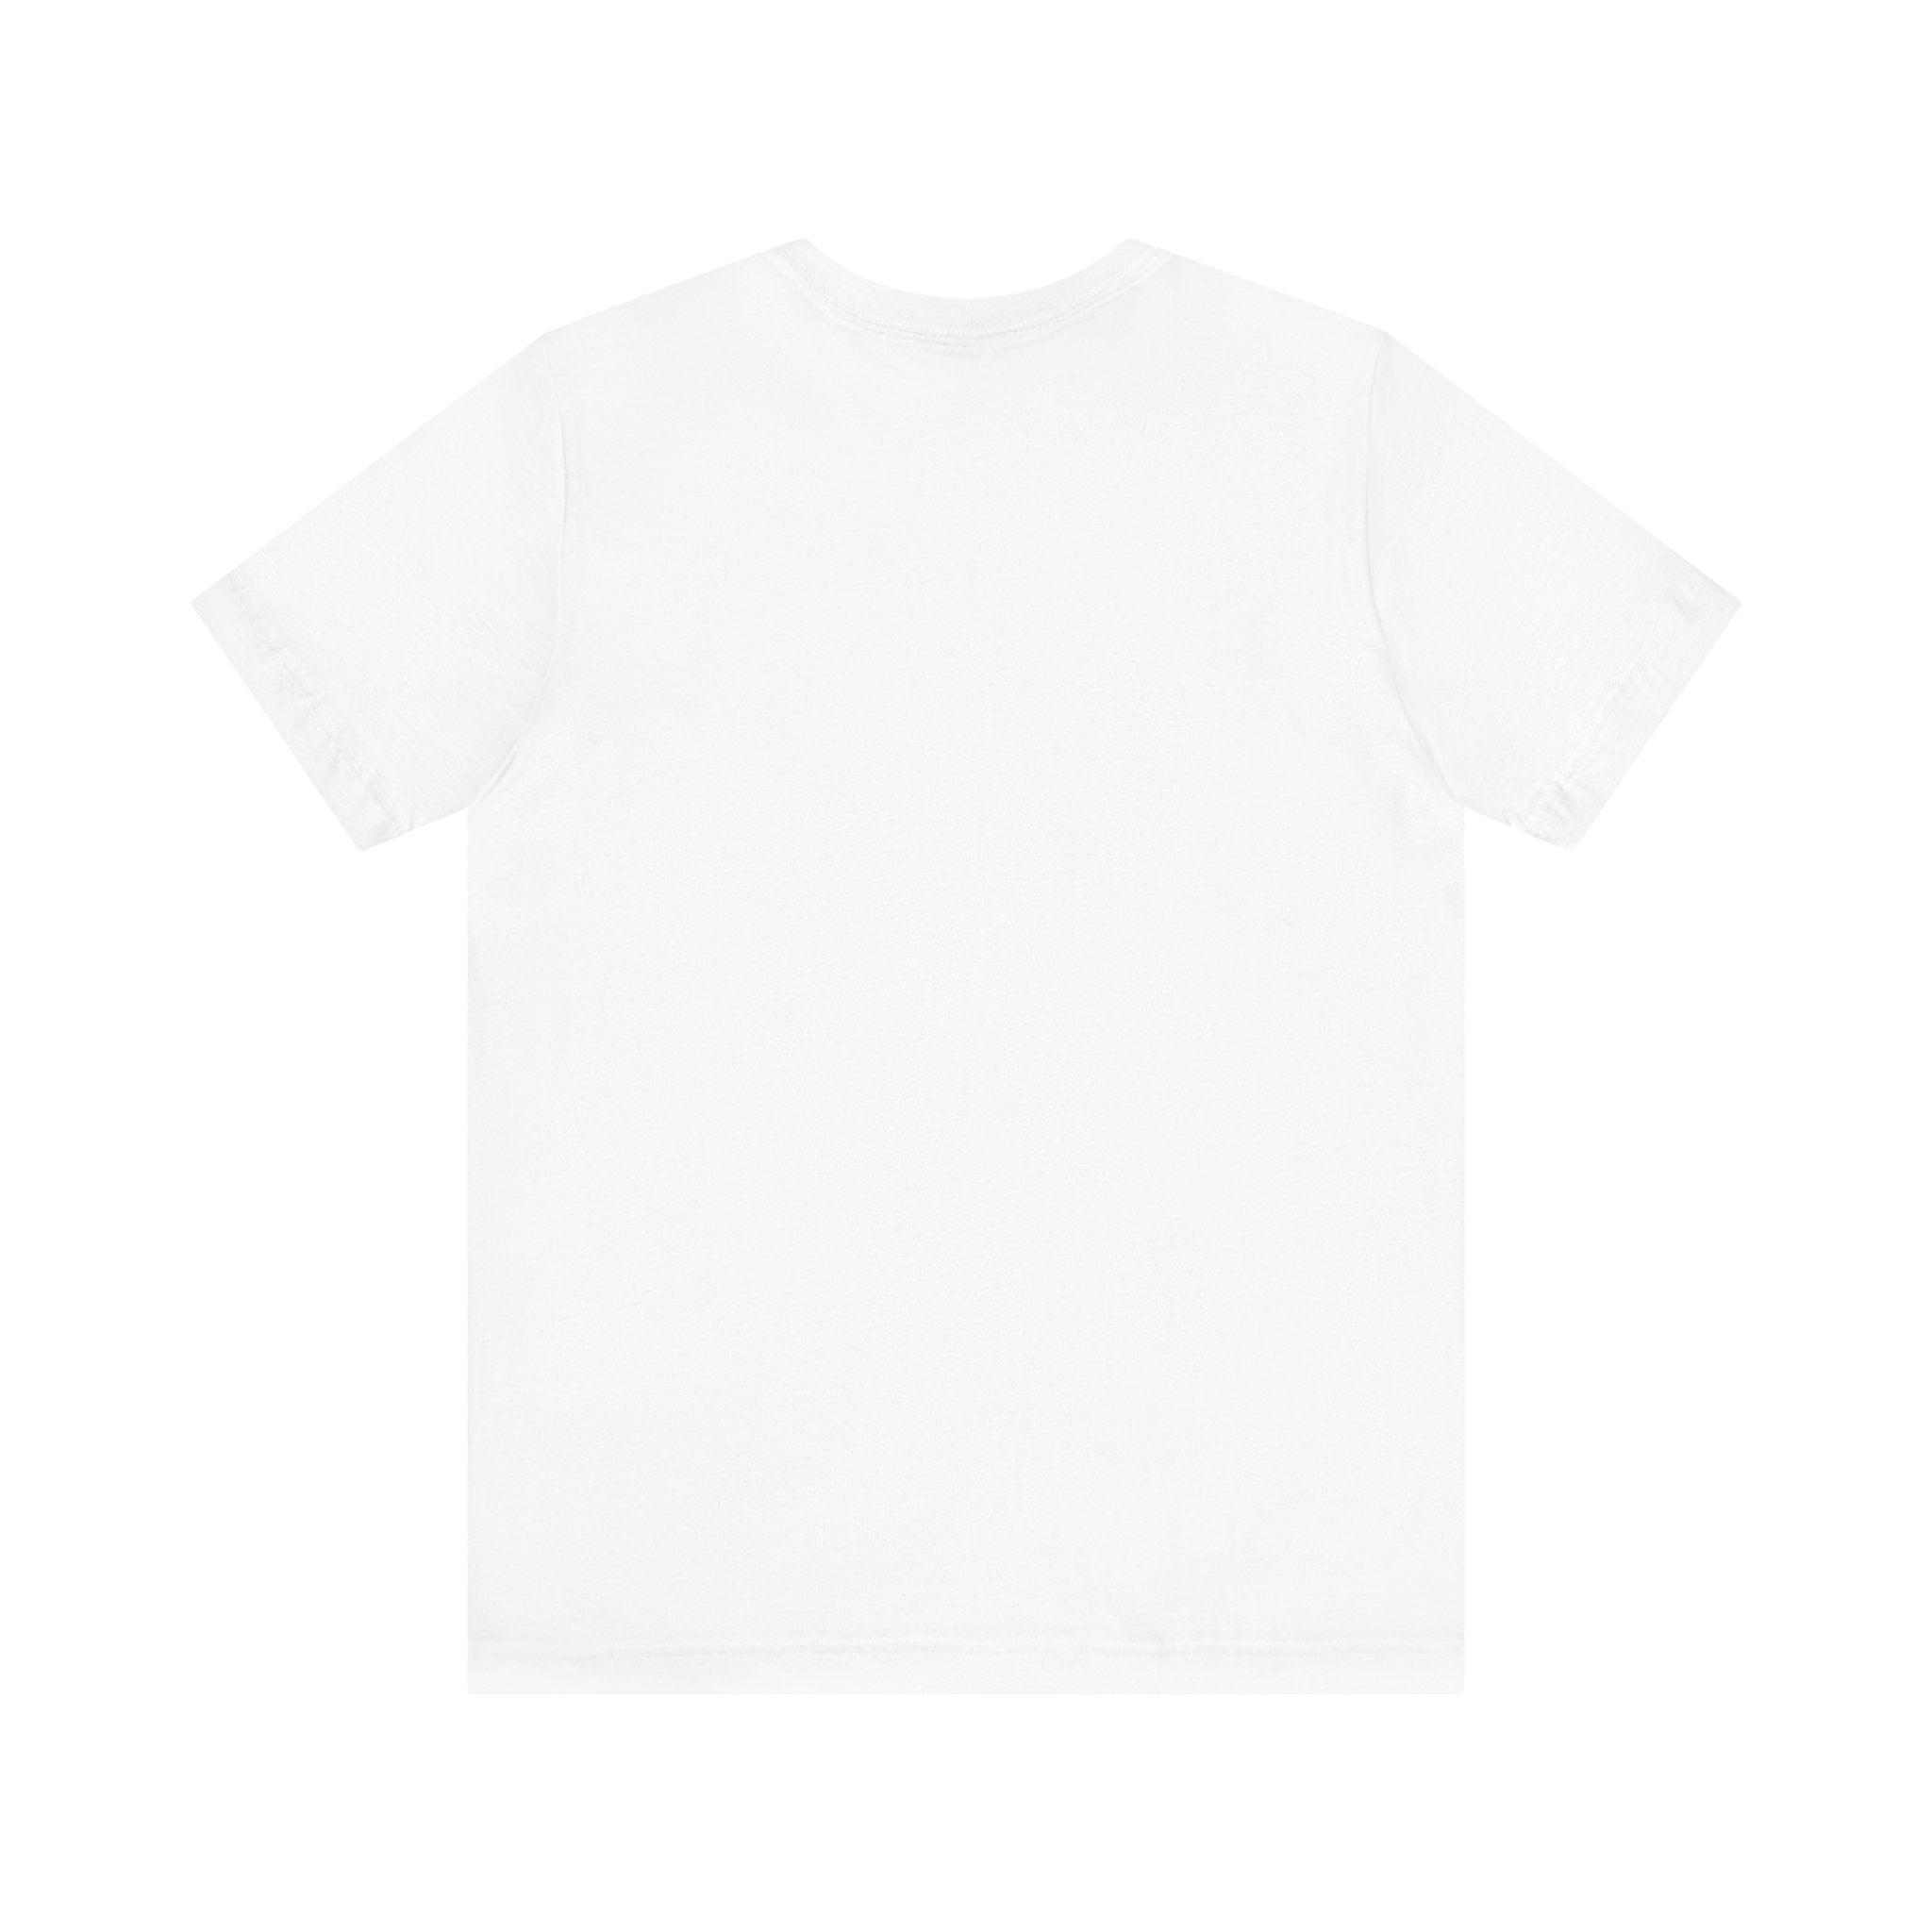 A plain white, stylish C-Ho-Co-La-Te - T-Shirt made from 100% Airlume cotton is shown laid out flat, facing backwards. The shirt has no visible logos, designs, or patterns.